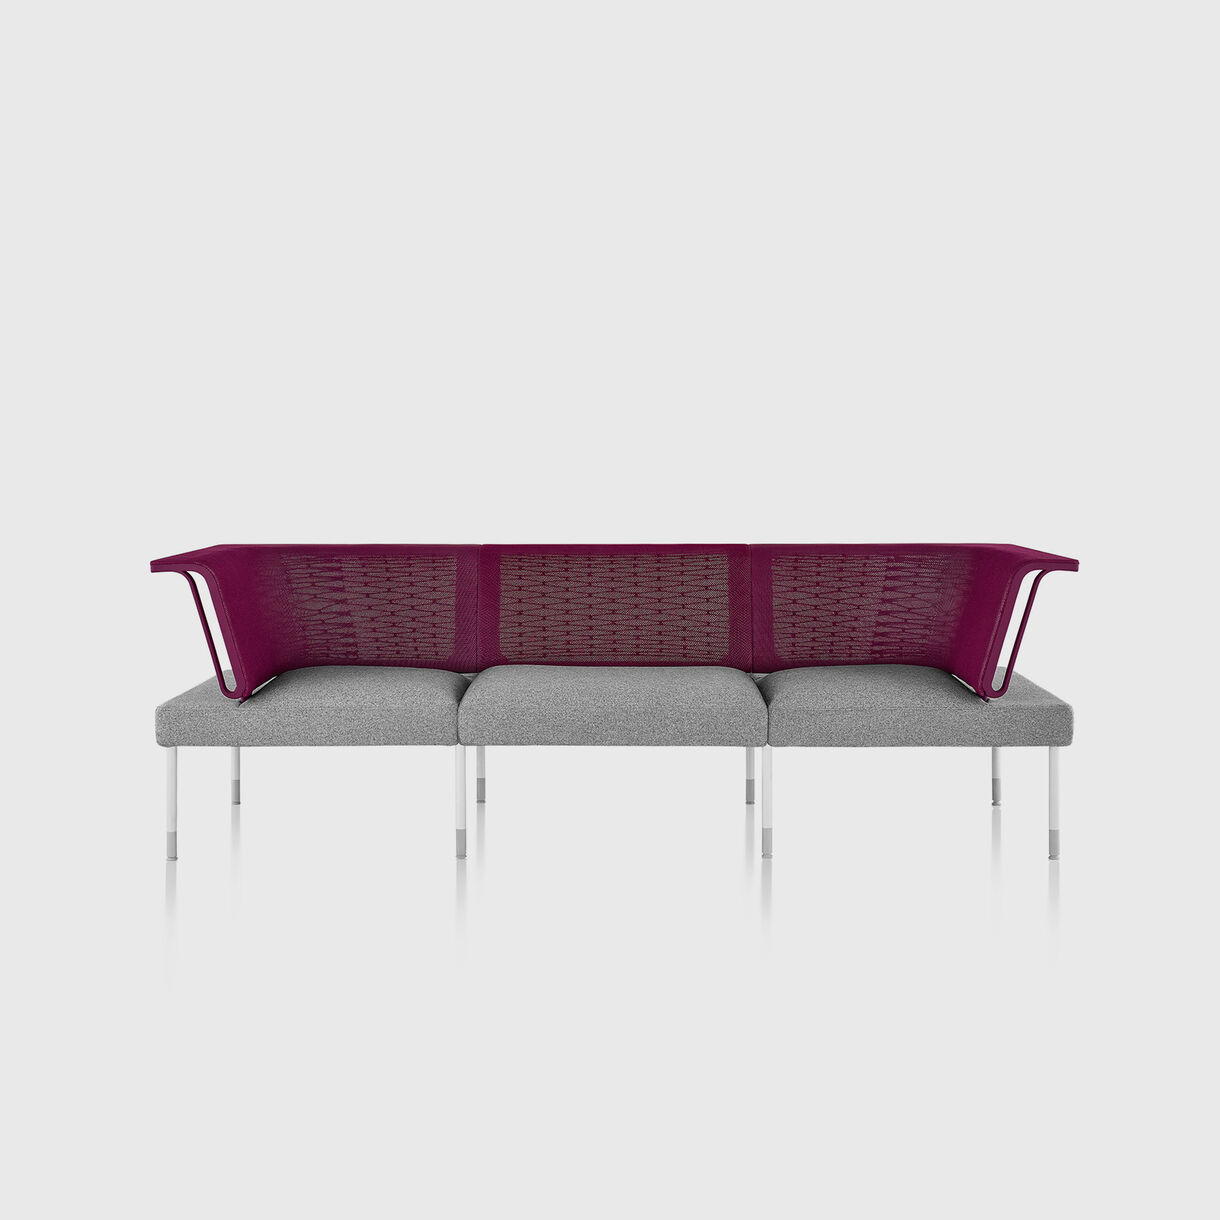 Public Office Sectional Seating, Lifestyle